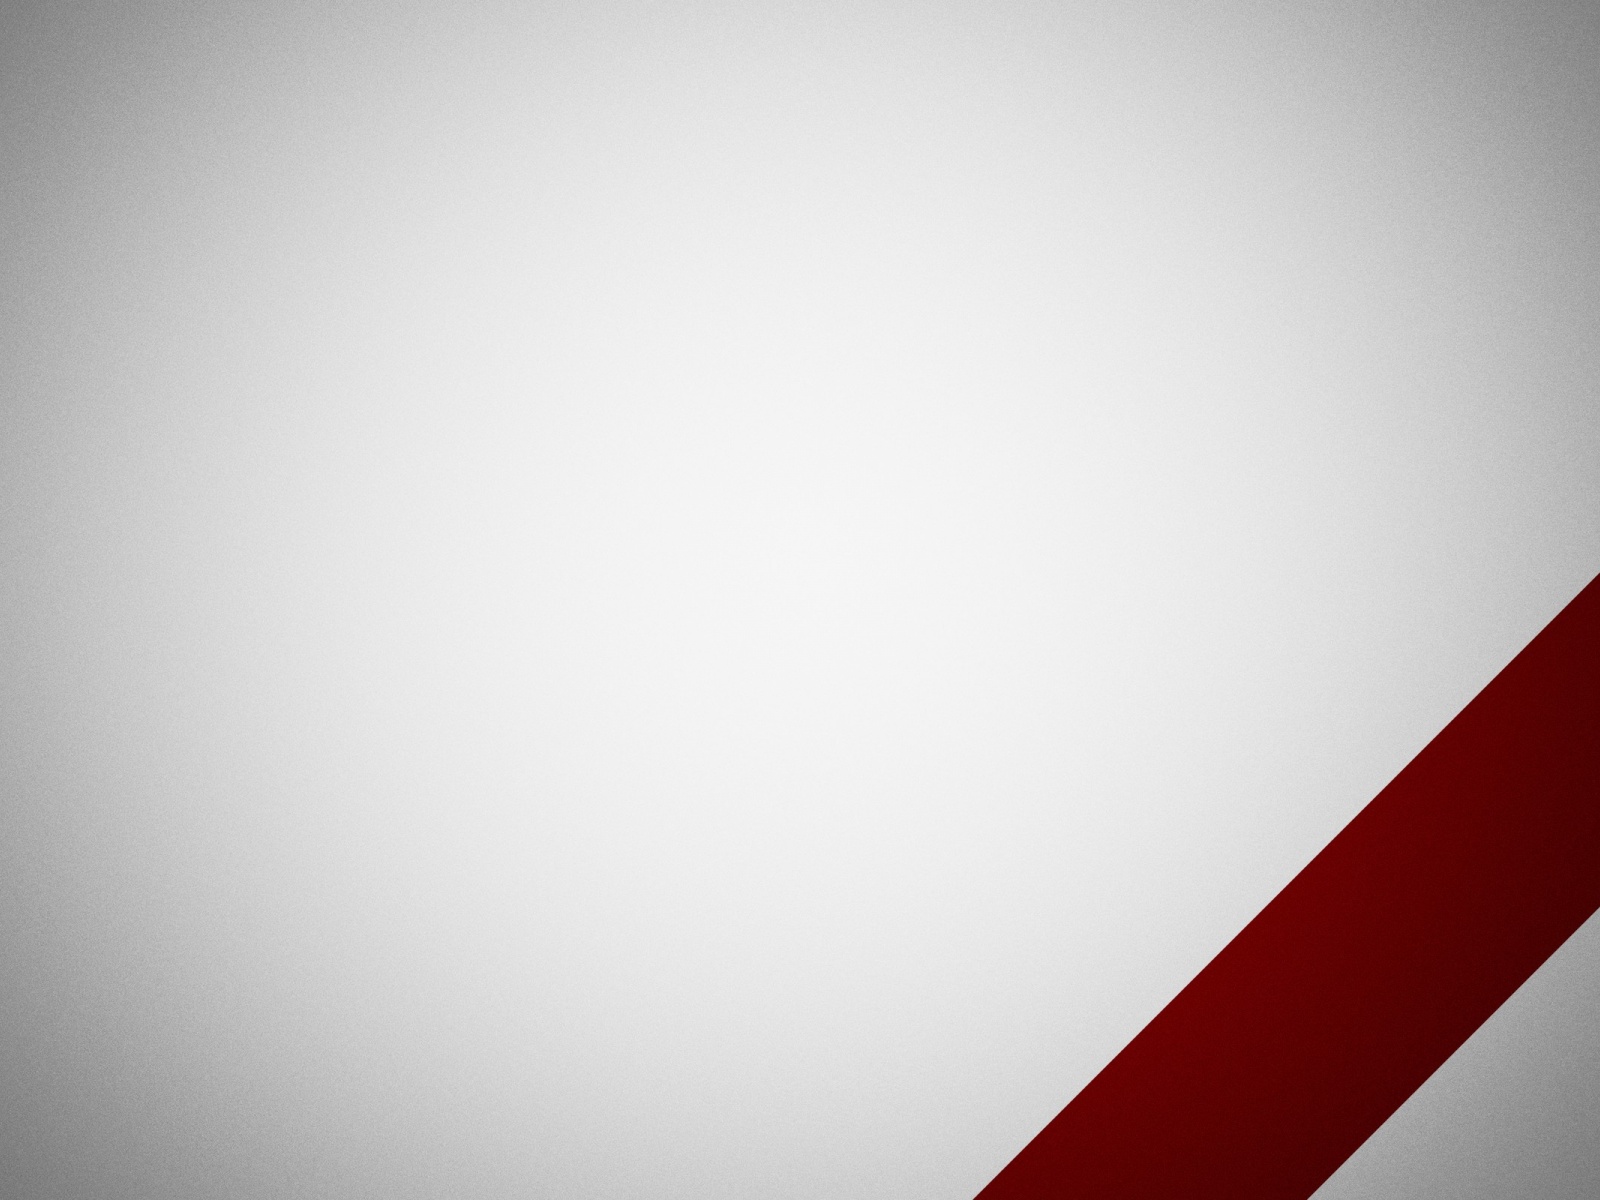 1600x1200 Red and White desktop PC and Mac wallpaper